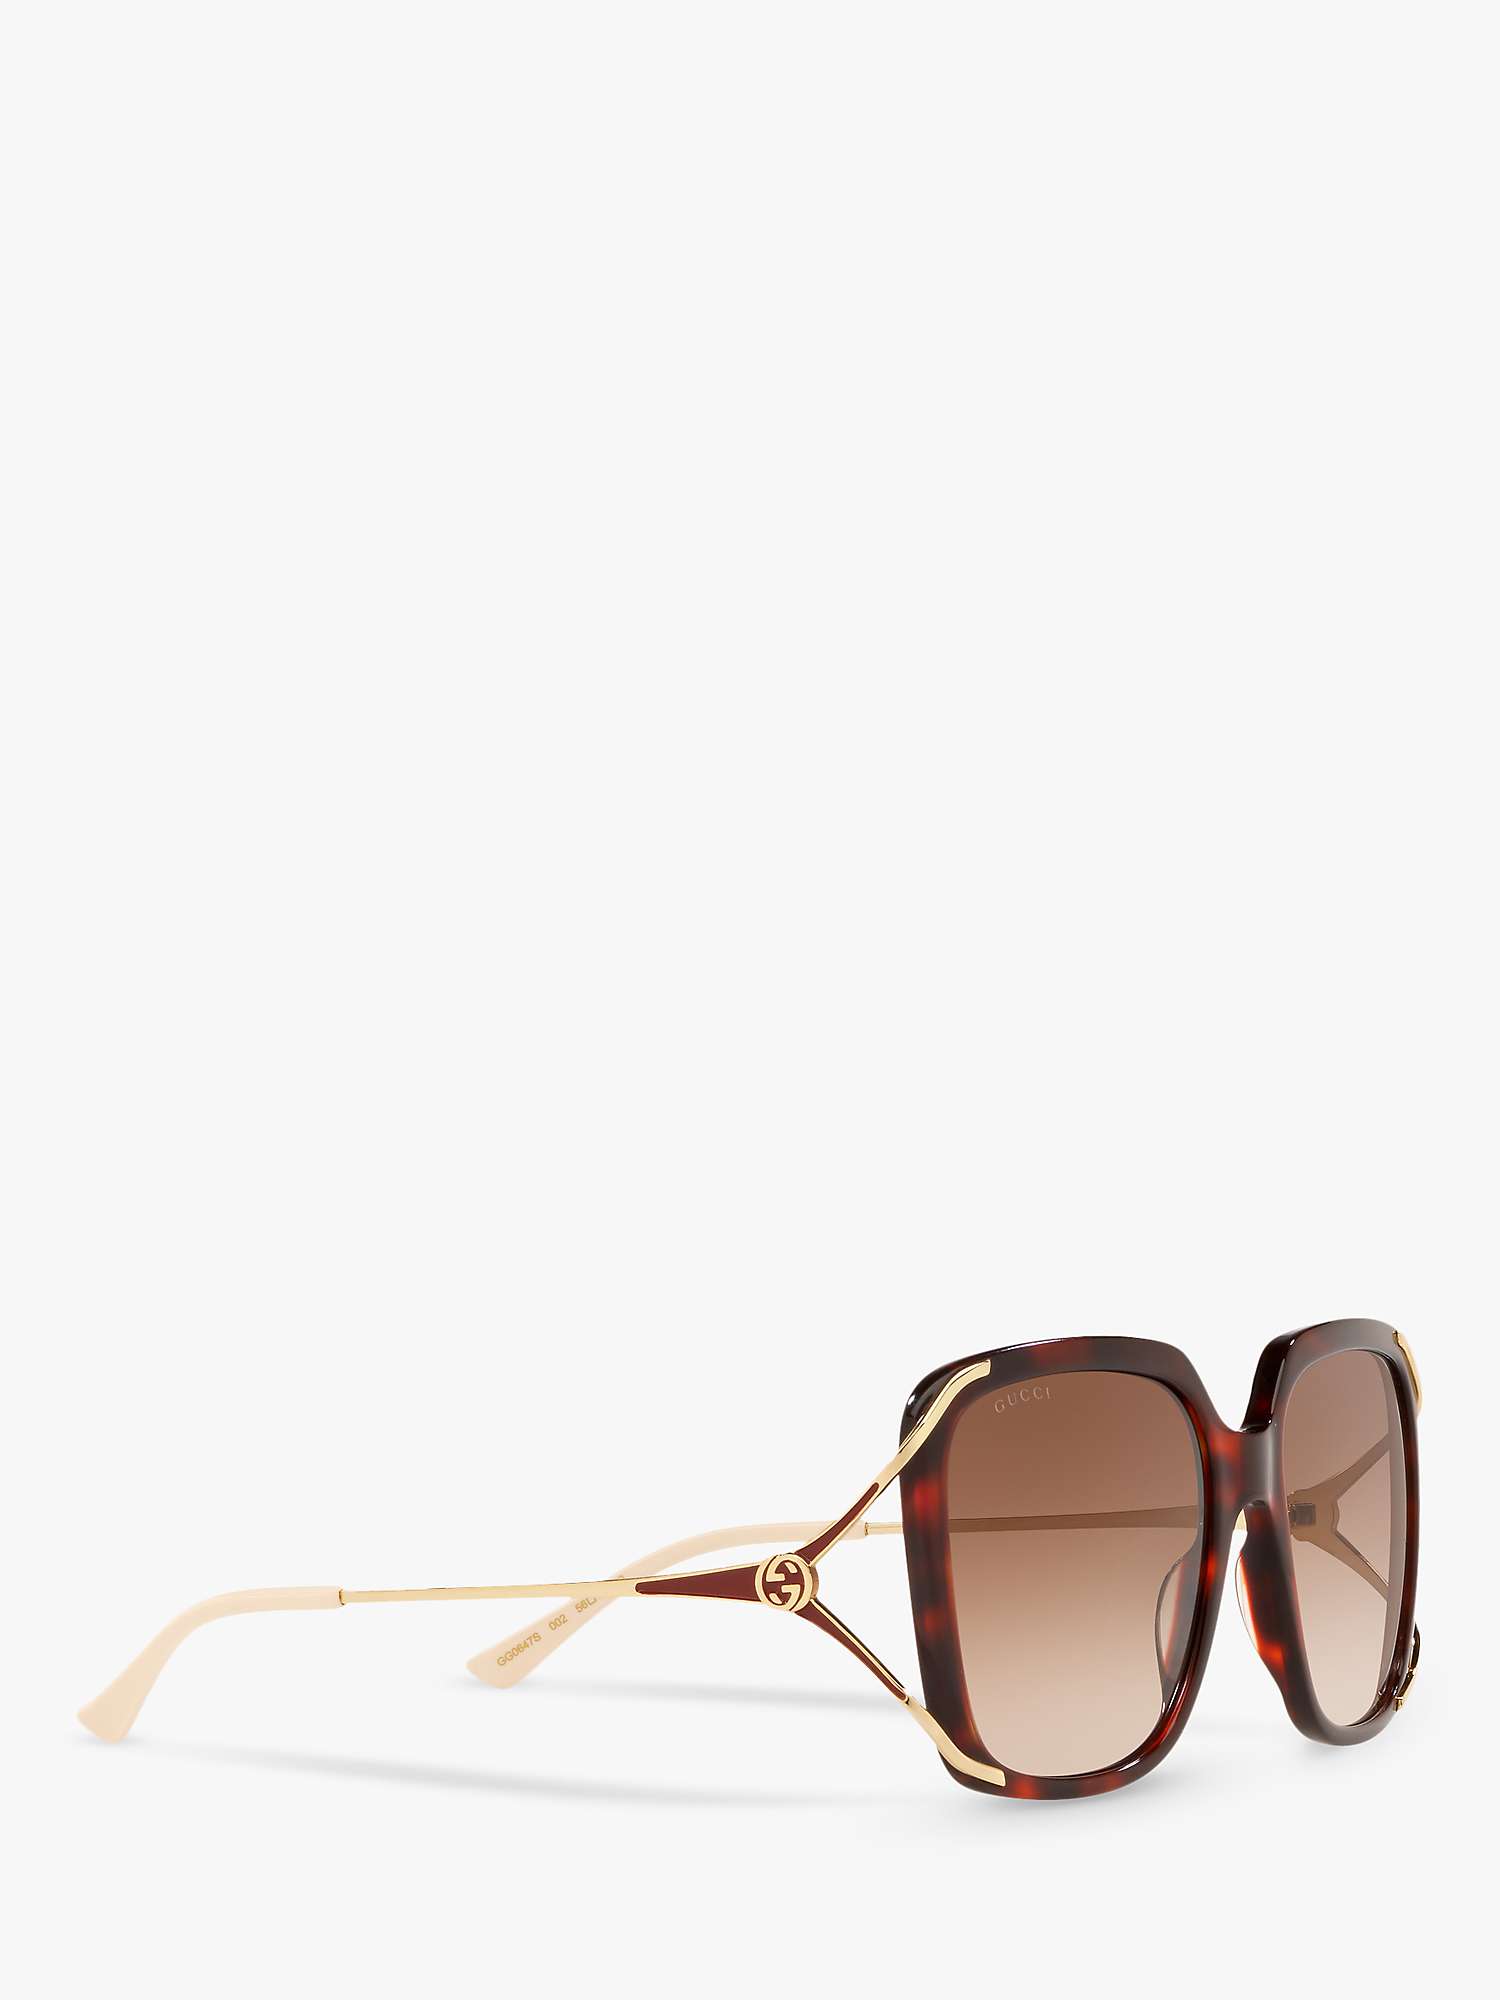 Gucci GG0647S Women's Statement Square Sunglasses, Red Havana/Brown  Gradient at John Lewis & Partners